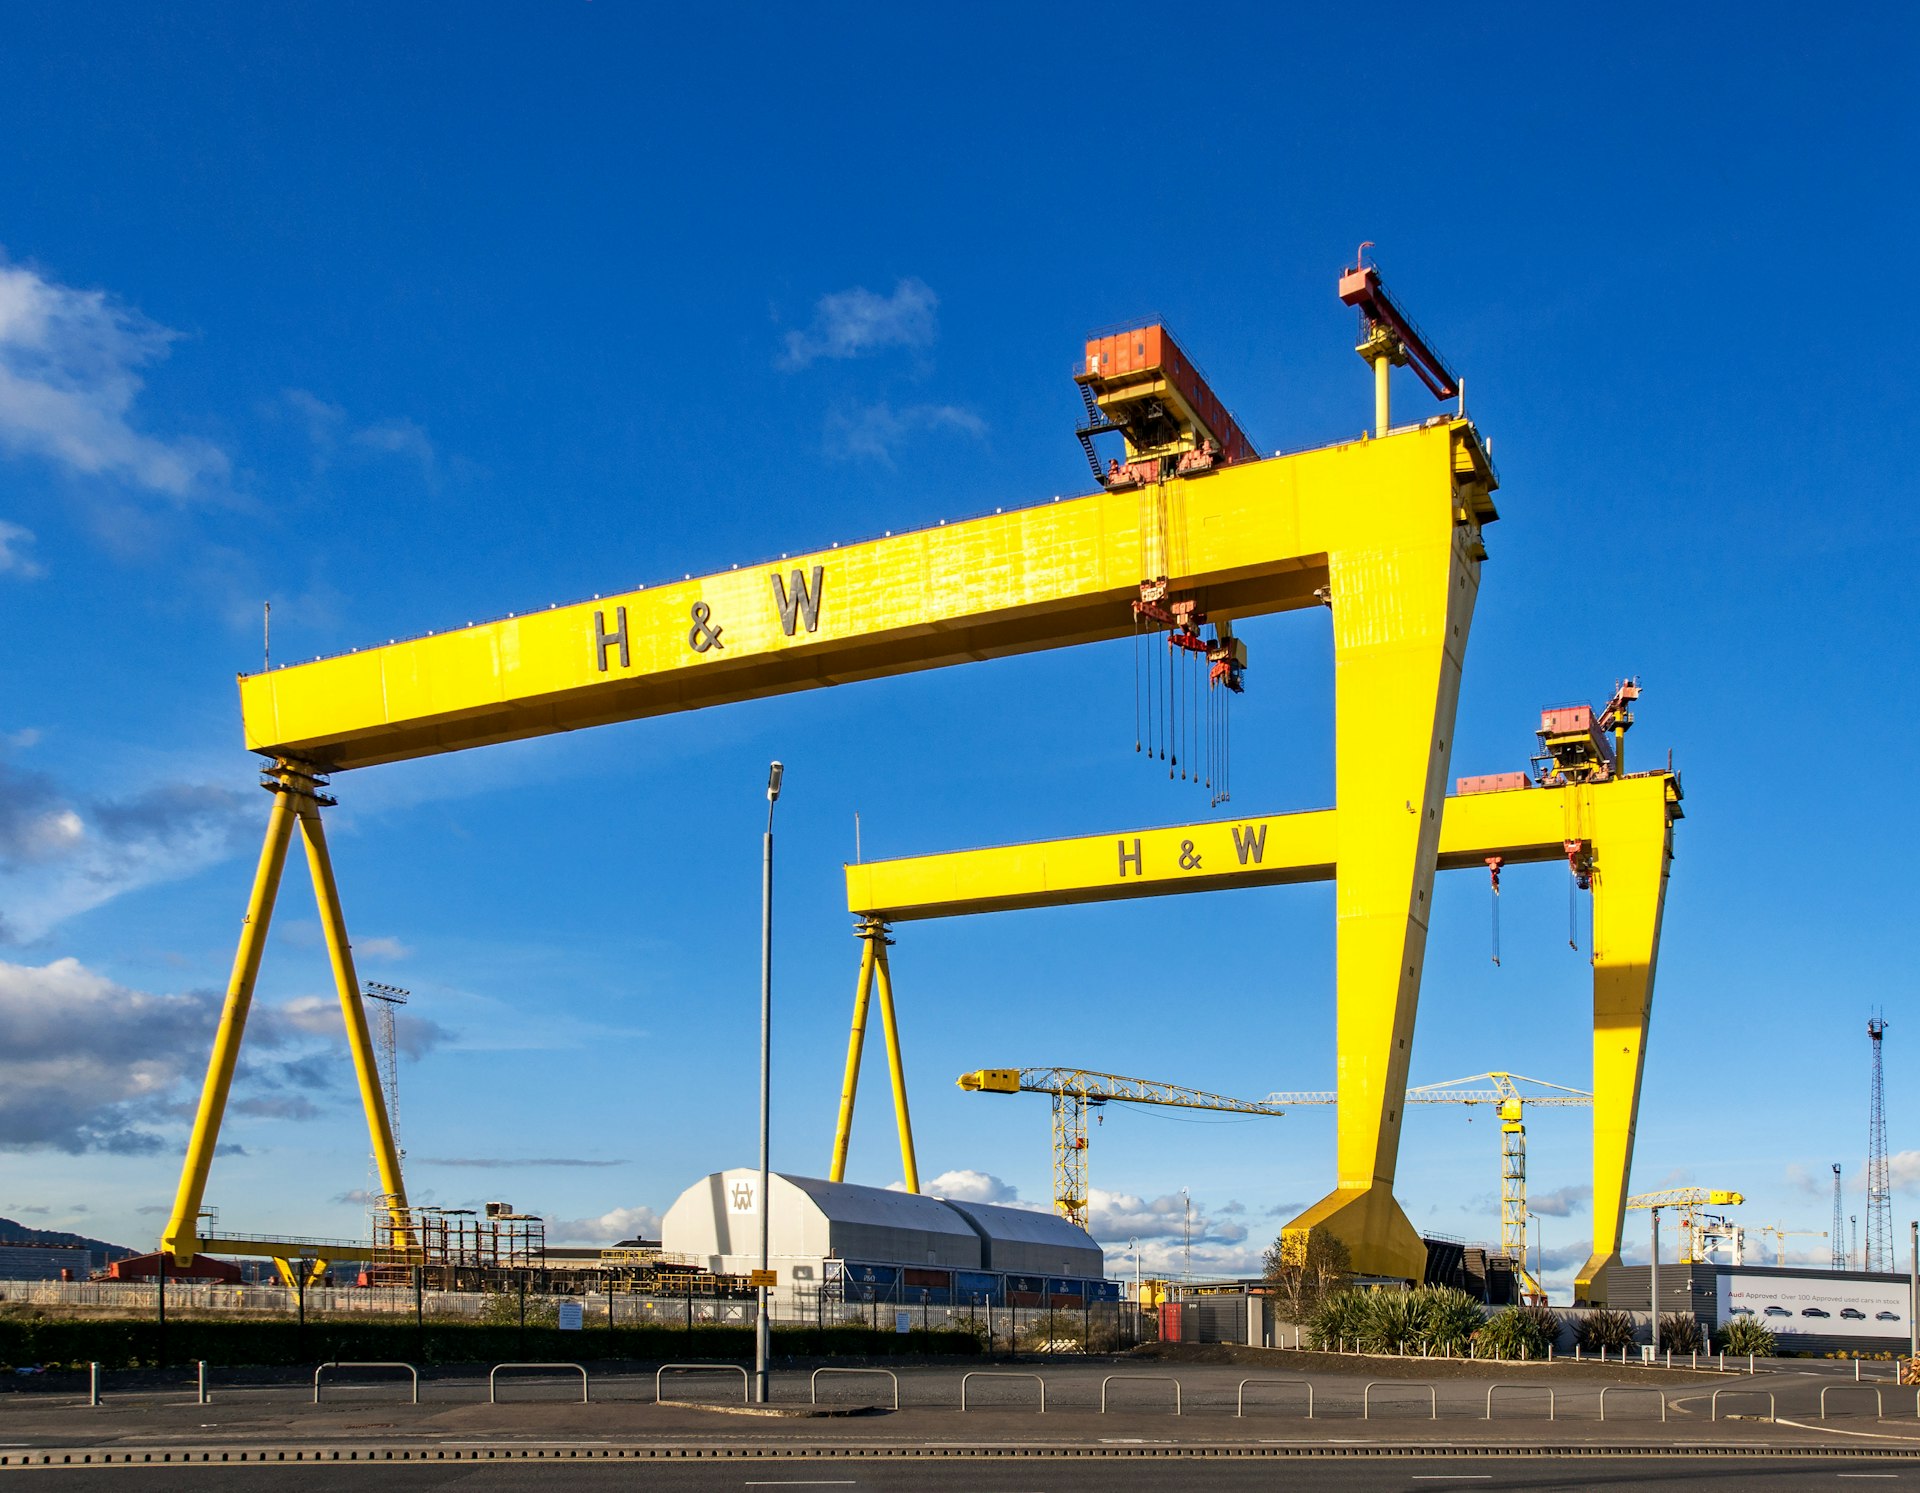 Samson and Goliath, twin shipbuilding gantry cranes in the Titanic quarter. Goliath is in the foreground. 